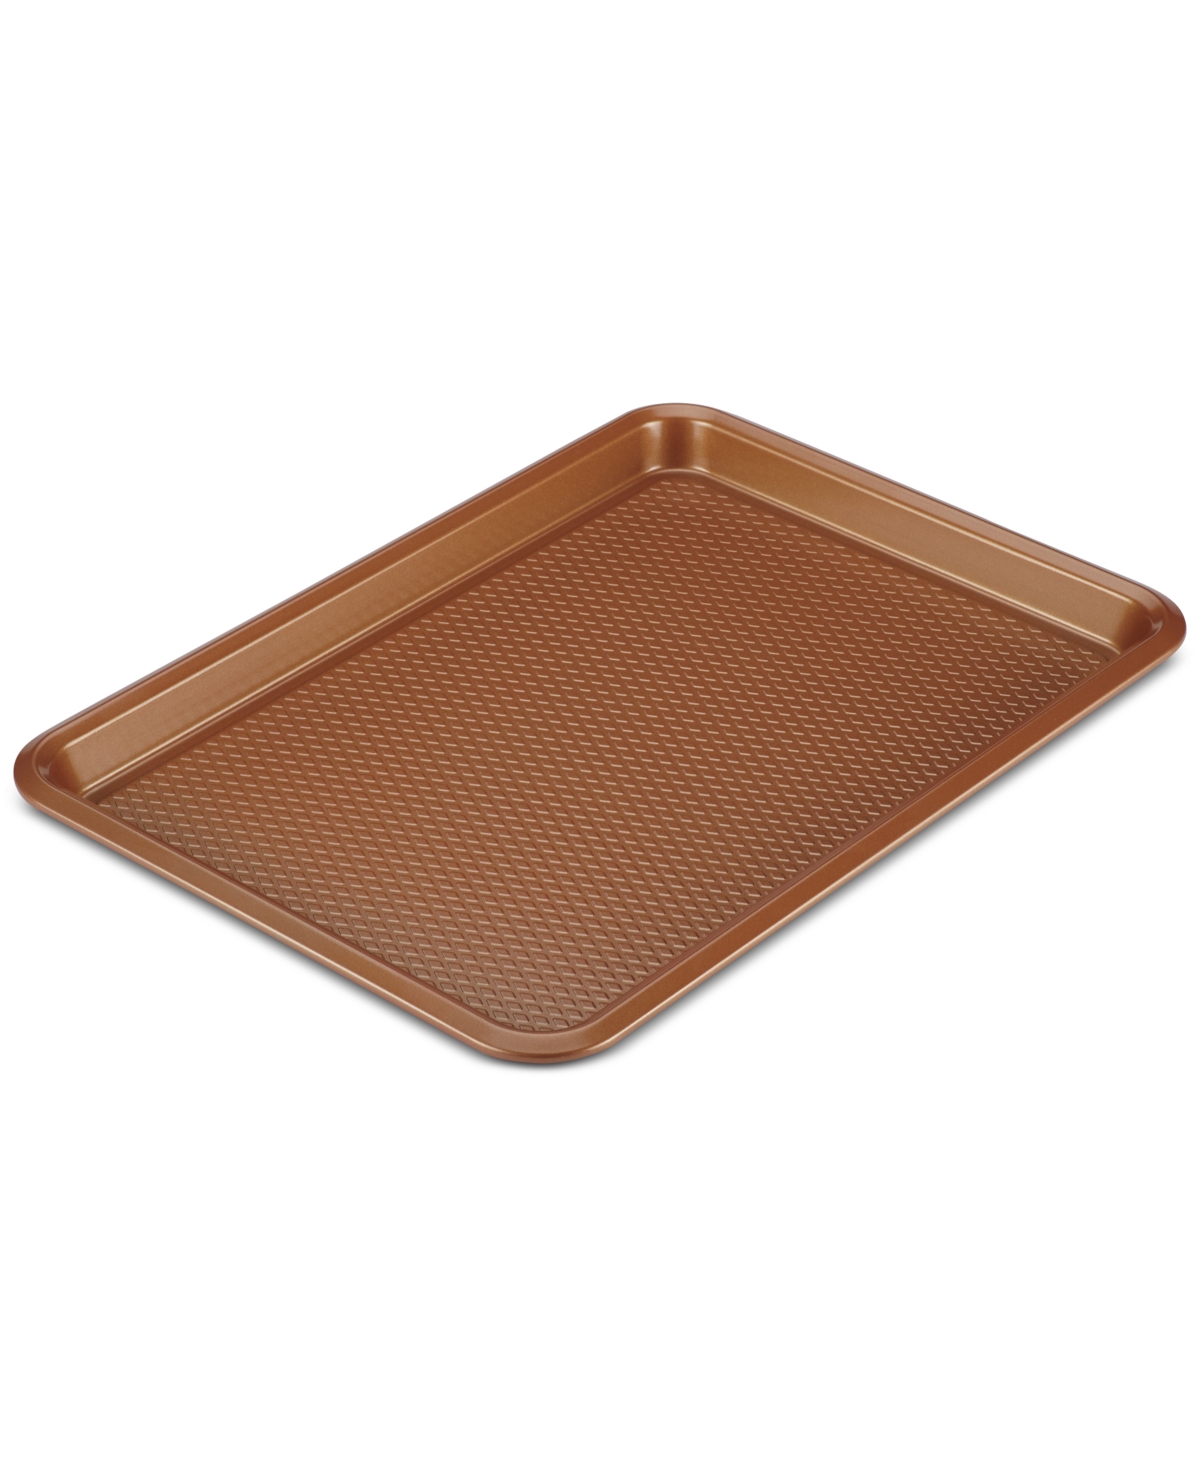 5881265 Ayesha Curry Home Collection Cookie Pan sku 5881265